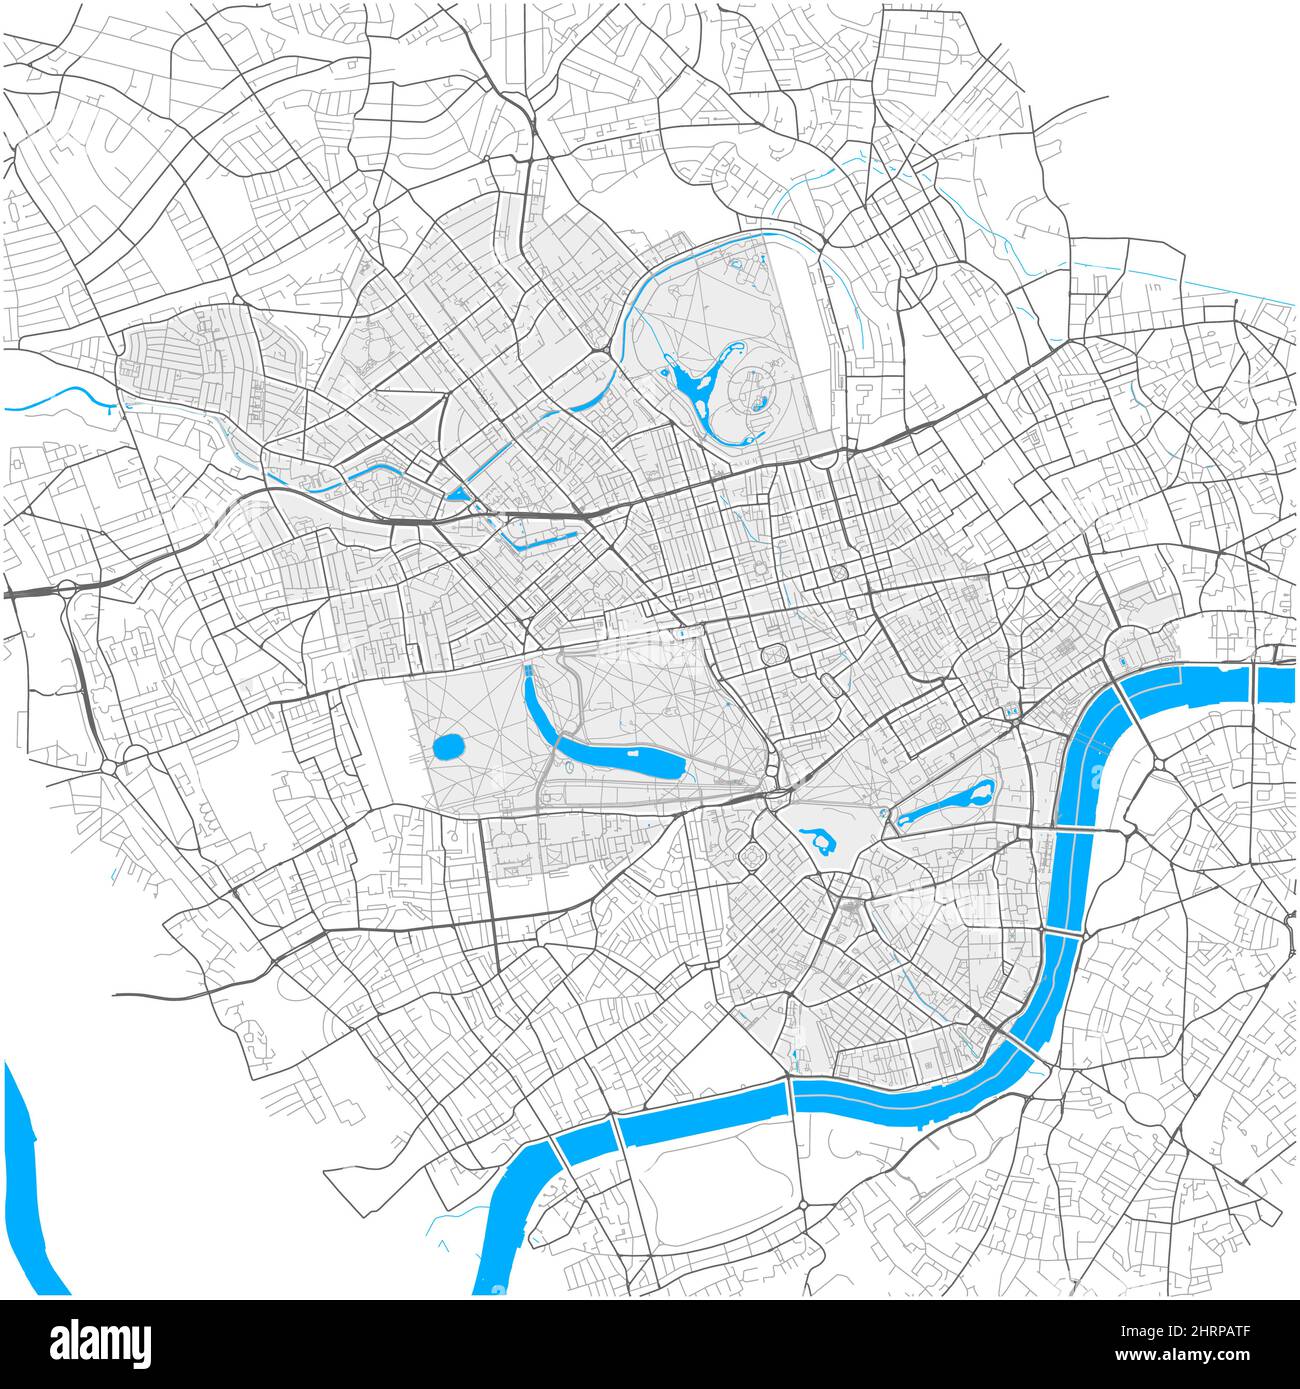 City of Westminster, London, United Kingdom, high detail vector map with city boundaries and editable paths. White outlines for main roads. Many small Stock Vector